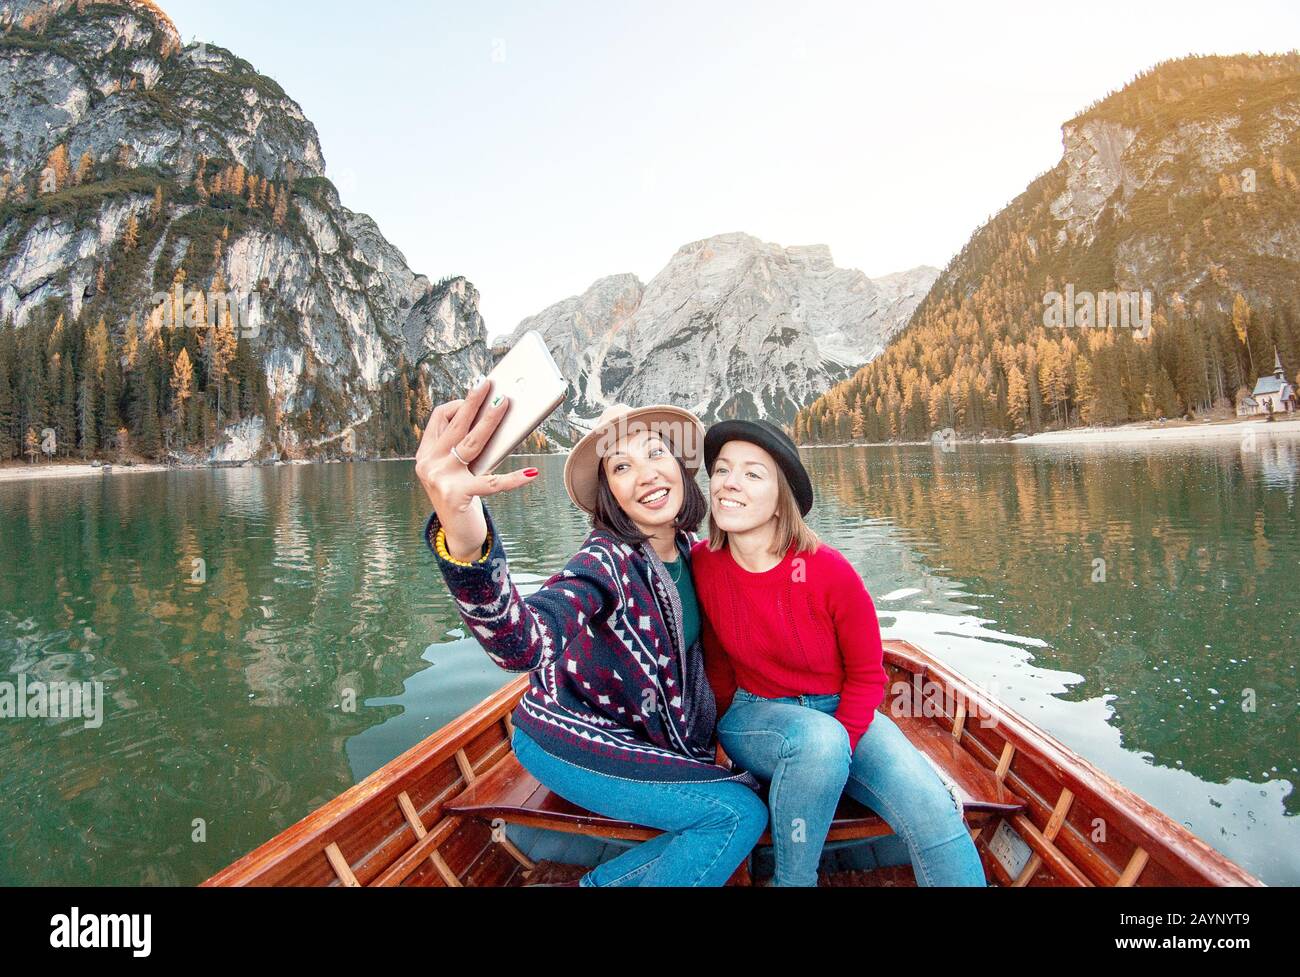 Two happy woman friends making selfie photo on the boat or canoe cruise tour on lago Di Braies lake in Italian Dolomites Alps Stock Photo